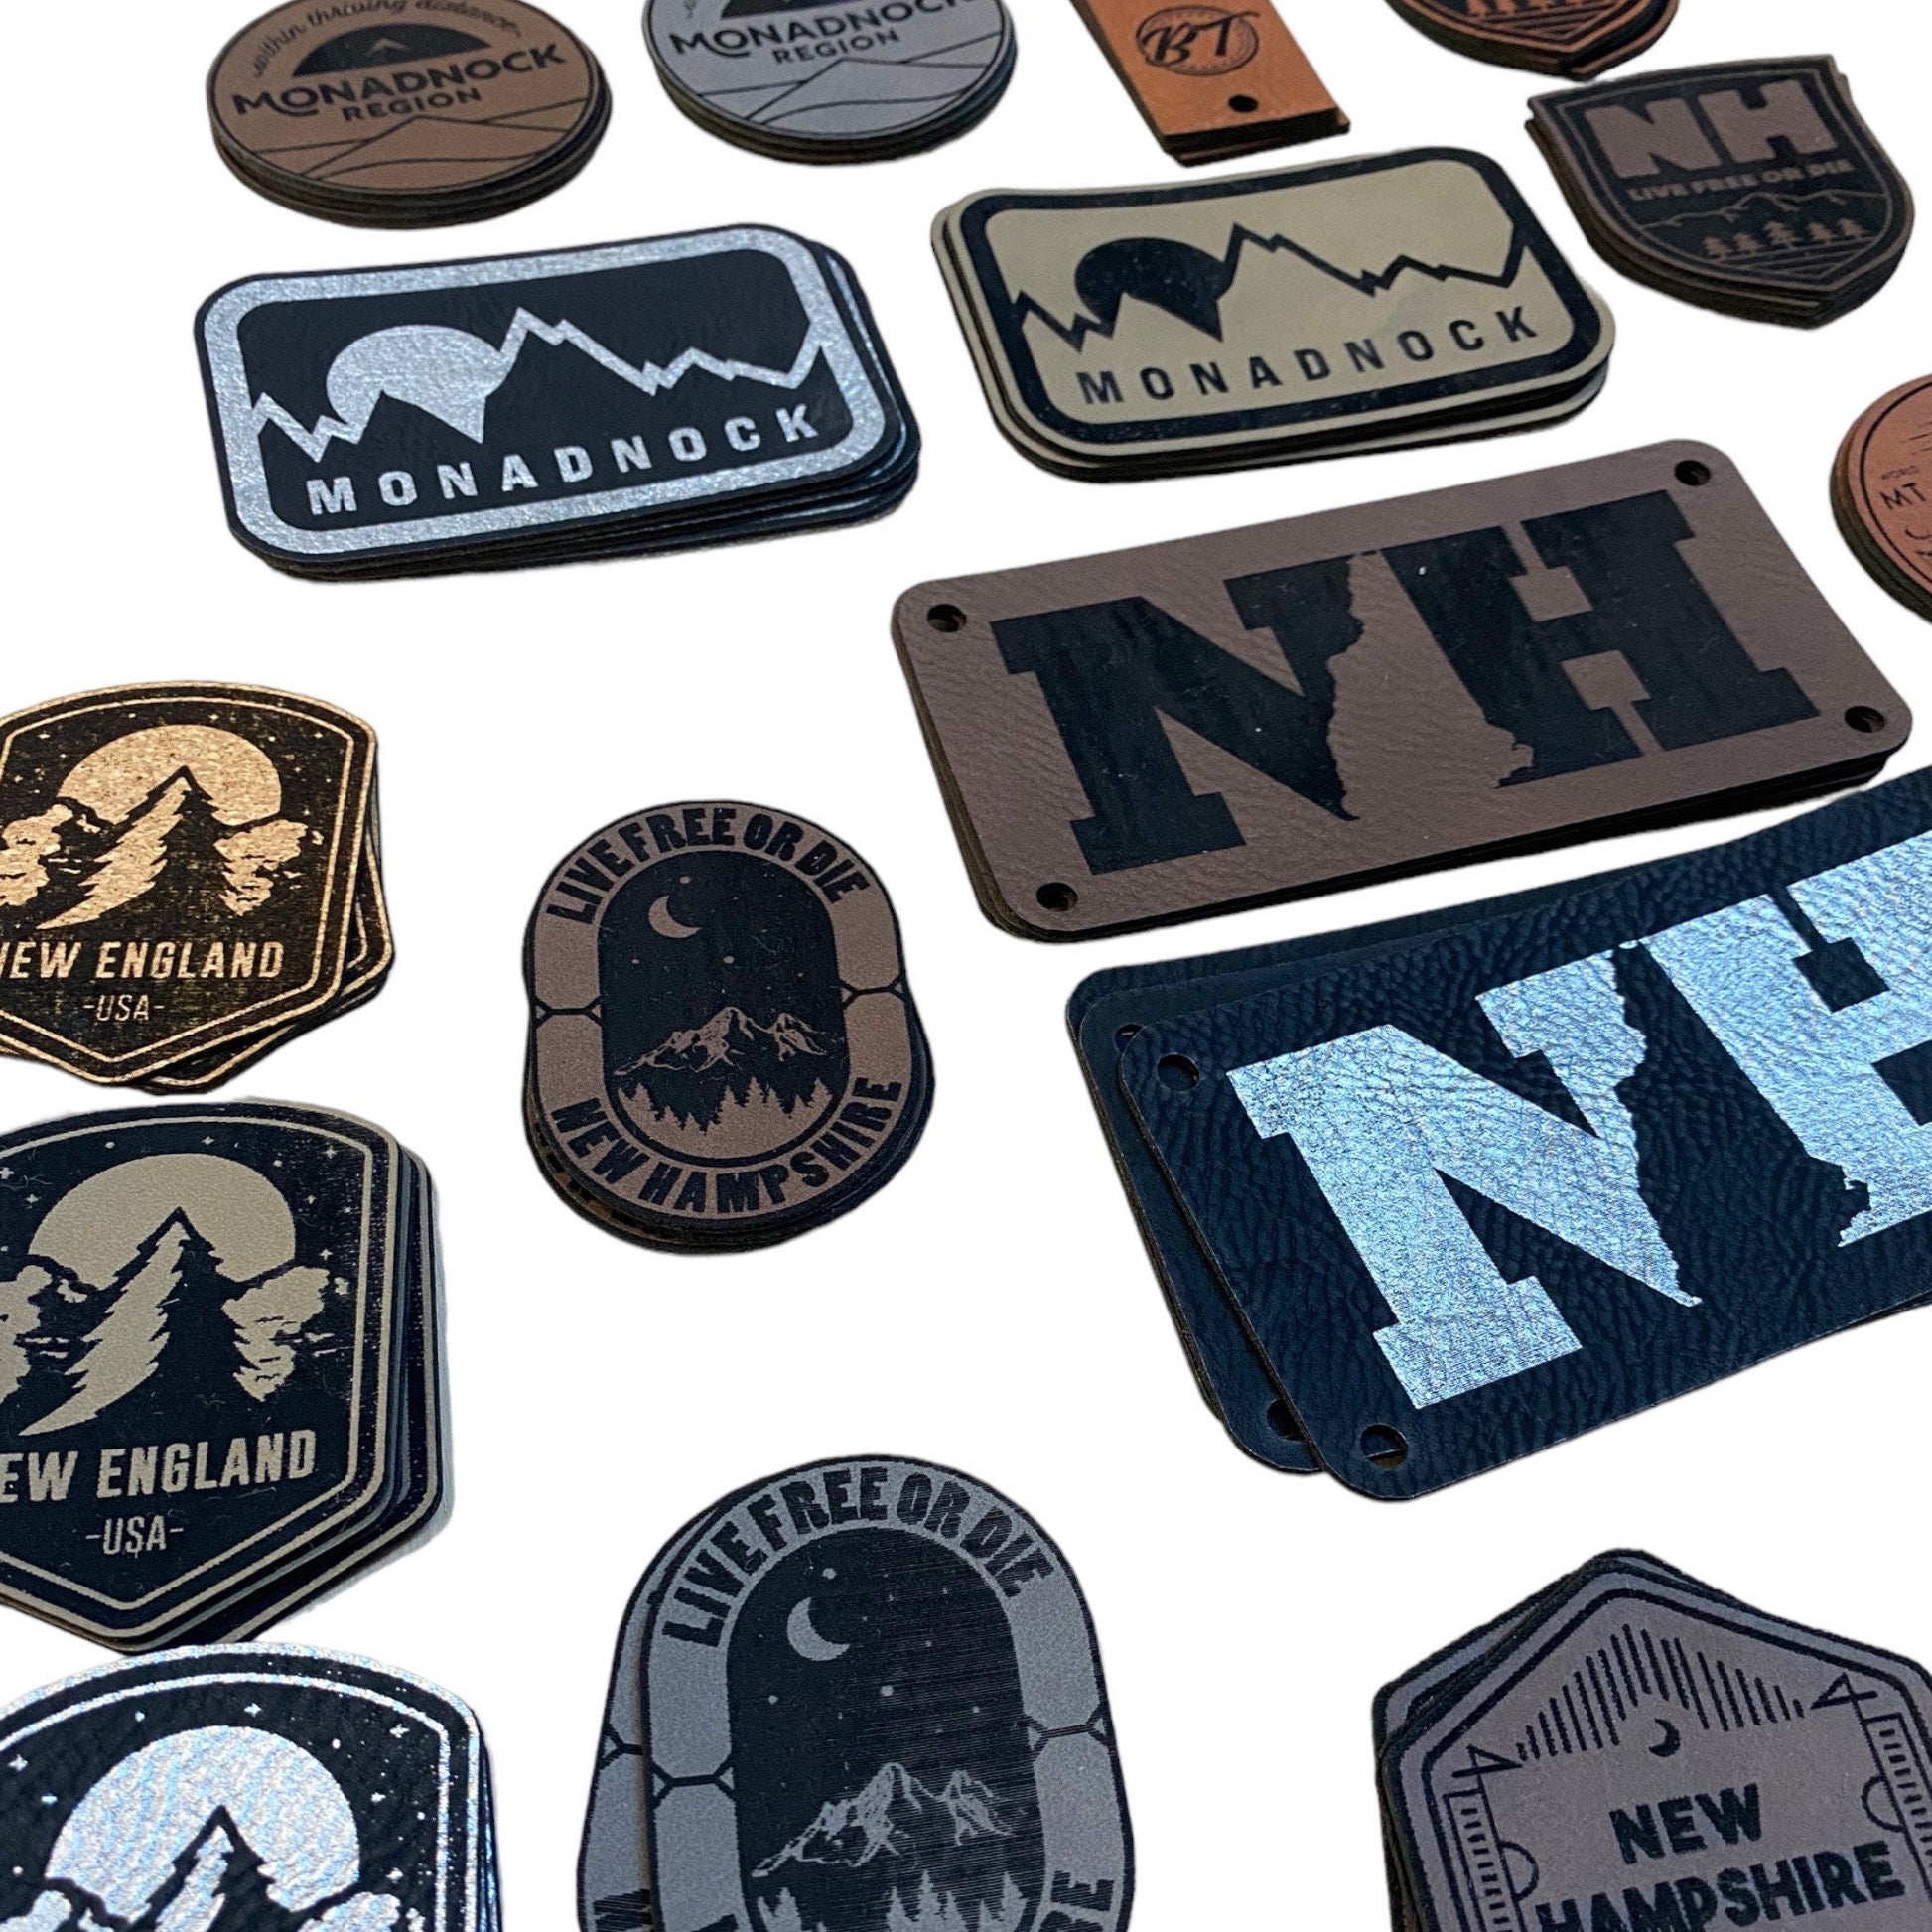 Custom Leatherette Patch No Minimums Bulk Rates heat seal option for personalized hats jackets beanies business logo family bachelorette